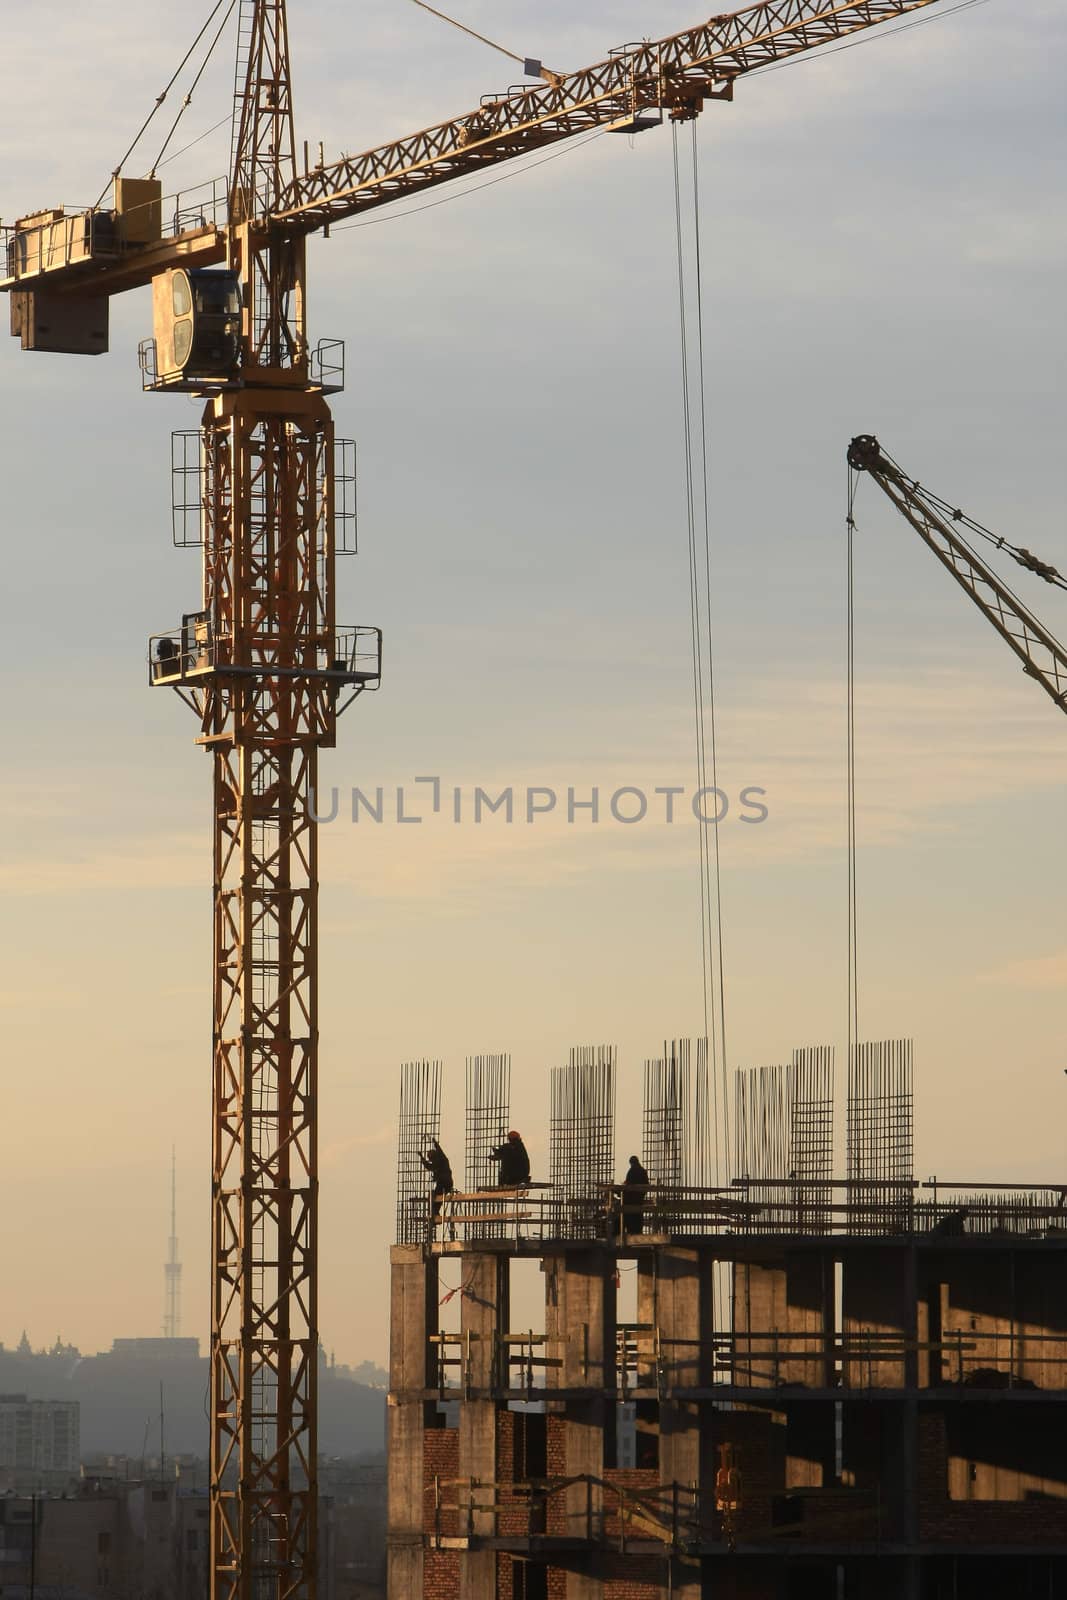 �onstruction activity. Silhouette of construction worker